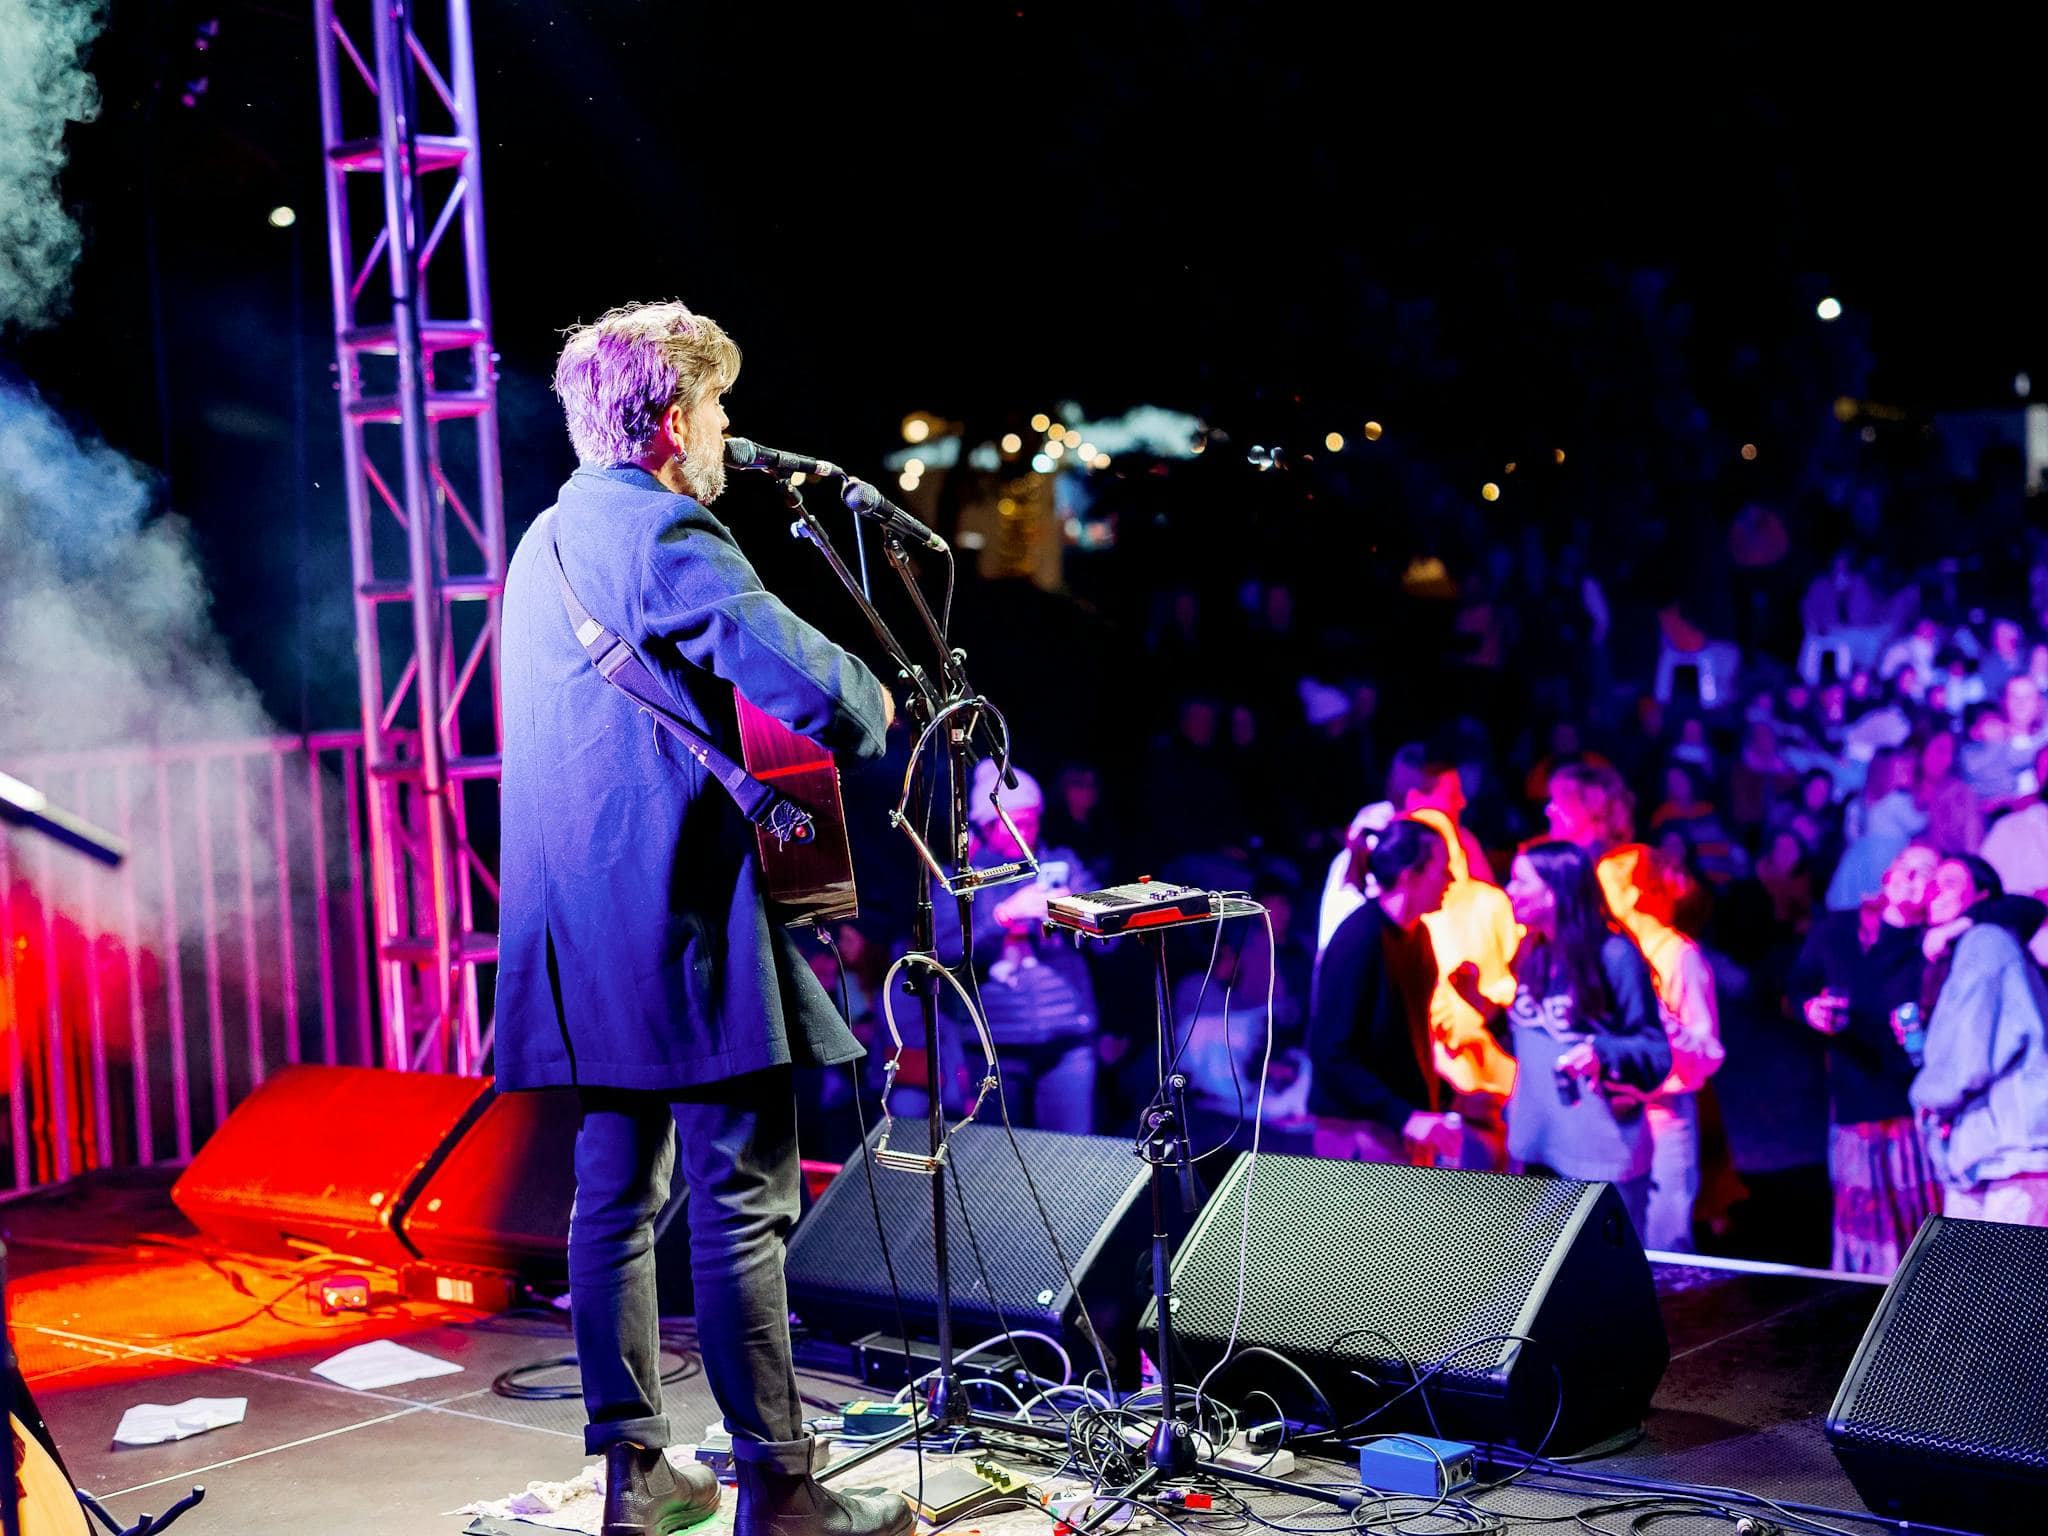 single performer, Josh Pyke plays guitar on a stage in front of a crowd